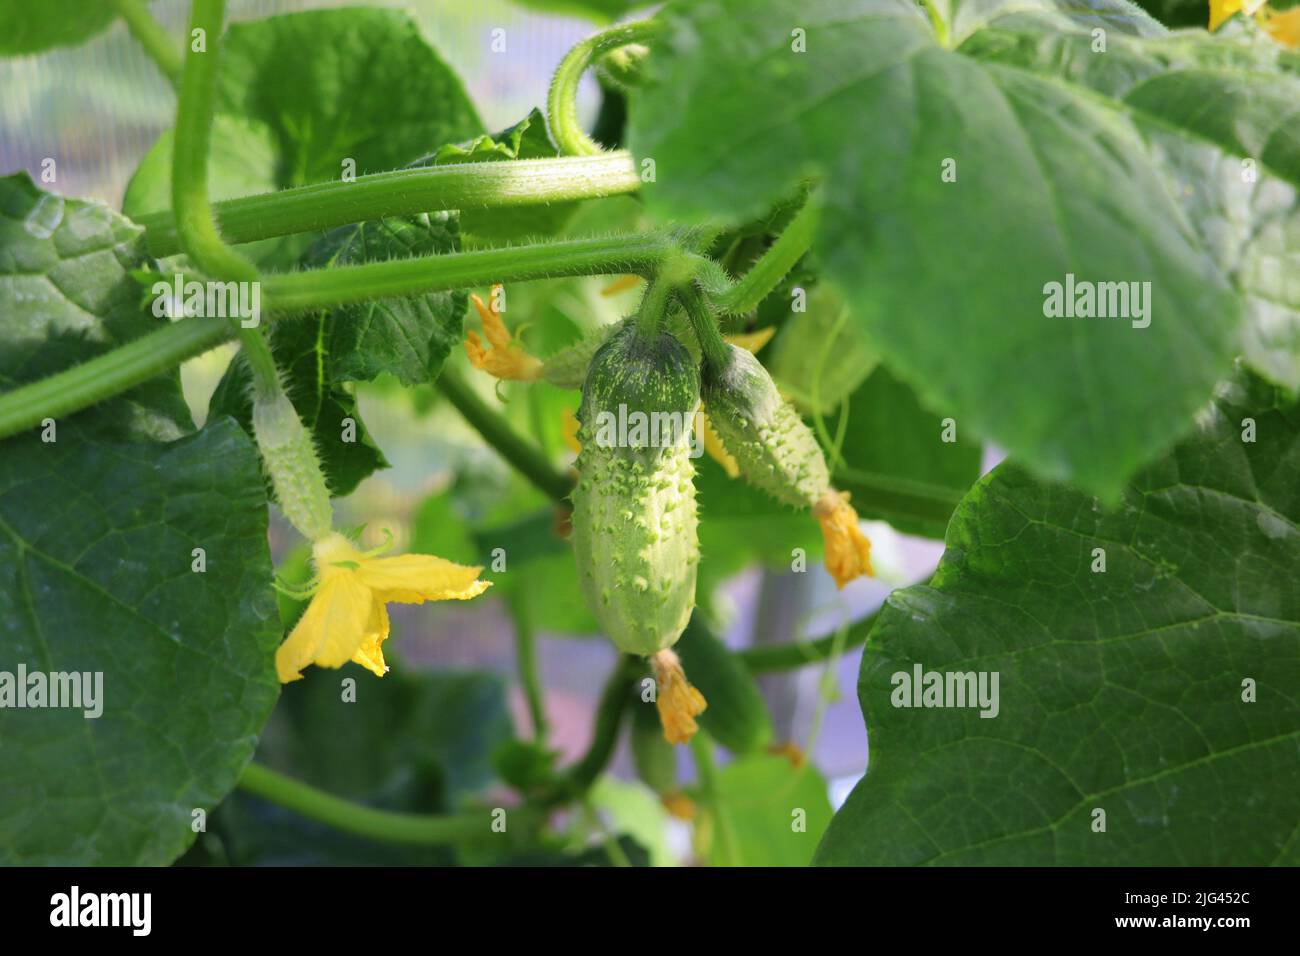 Cucumbers growing in a greenhouse, healthy vegetables without pesticide, organic product. Stock Photo